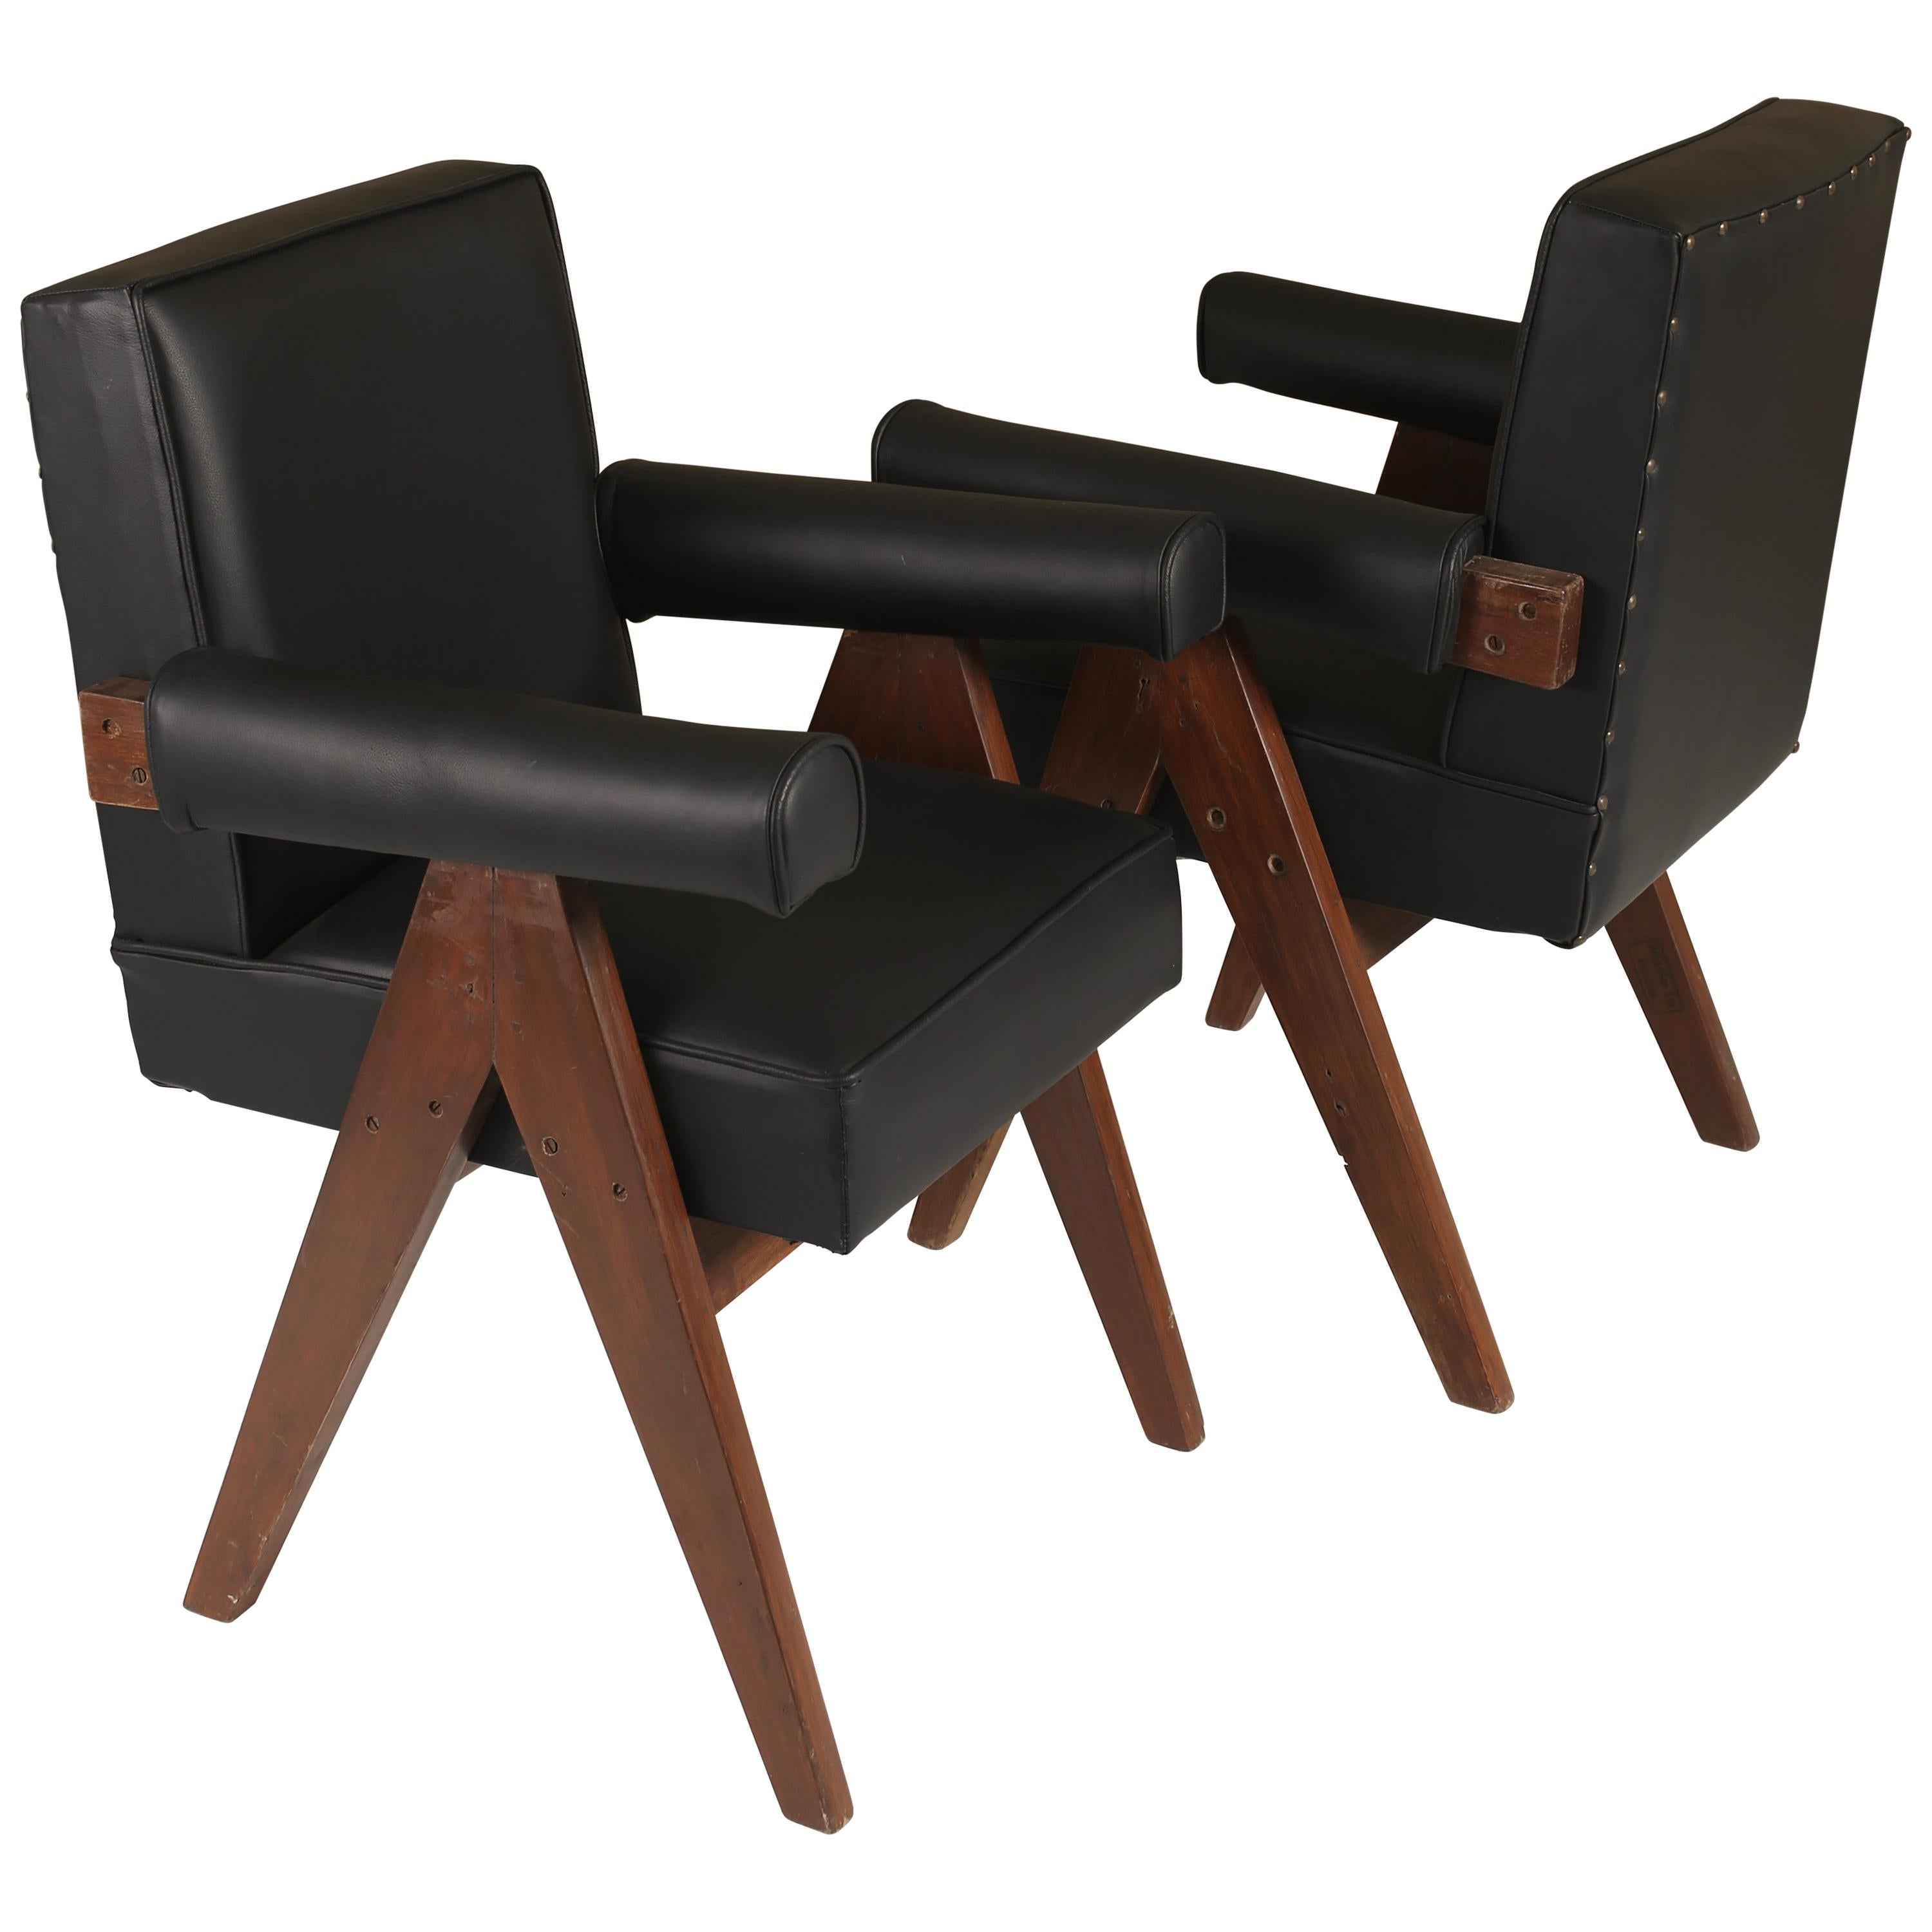 Pierre Jeanneret “Committee chair”, PJ-SI-30-C from High Court, Chandigarh For Sale